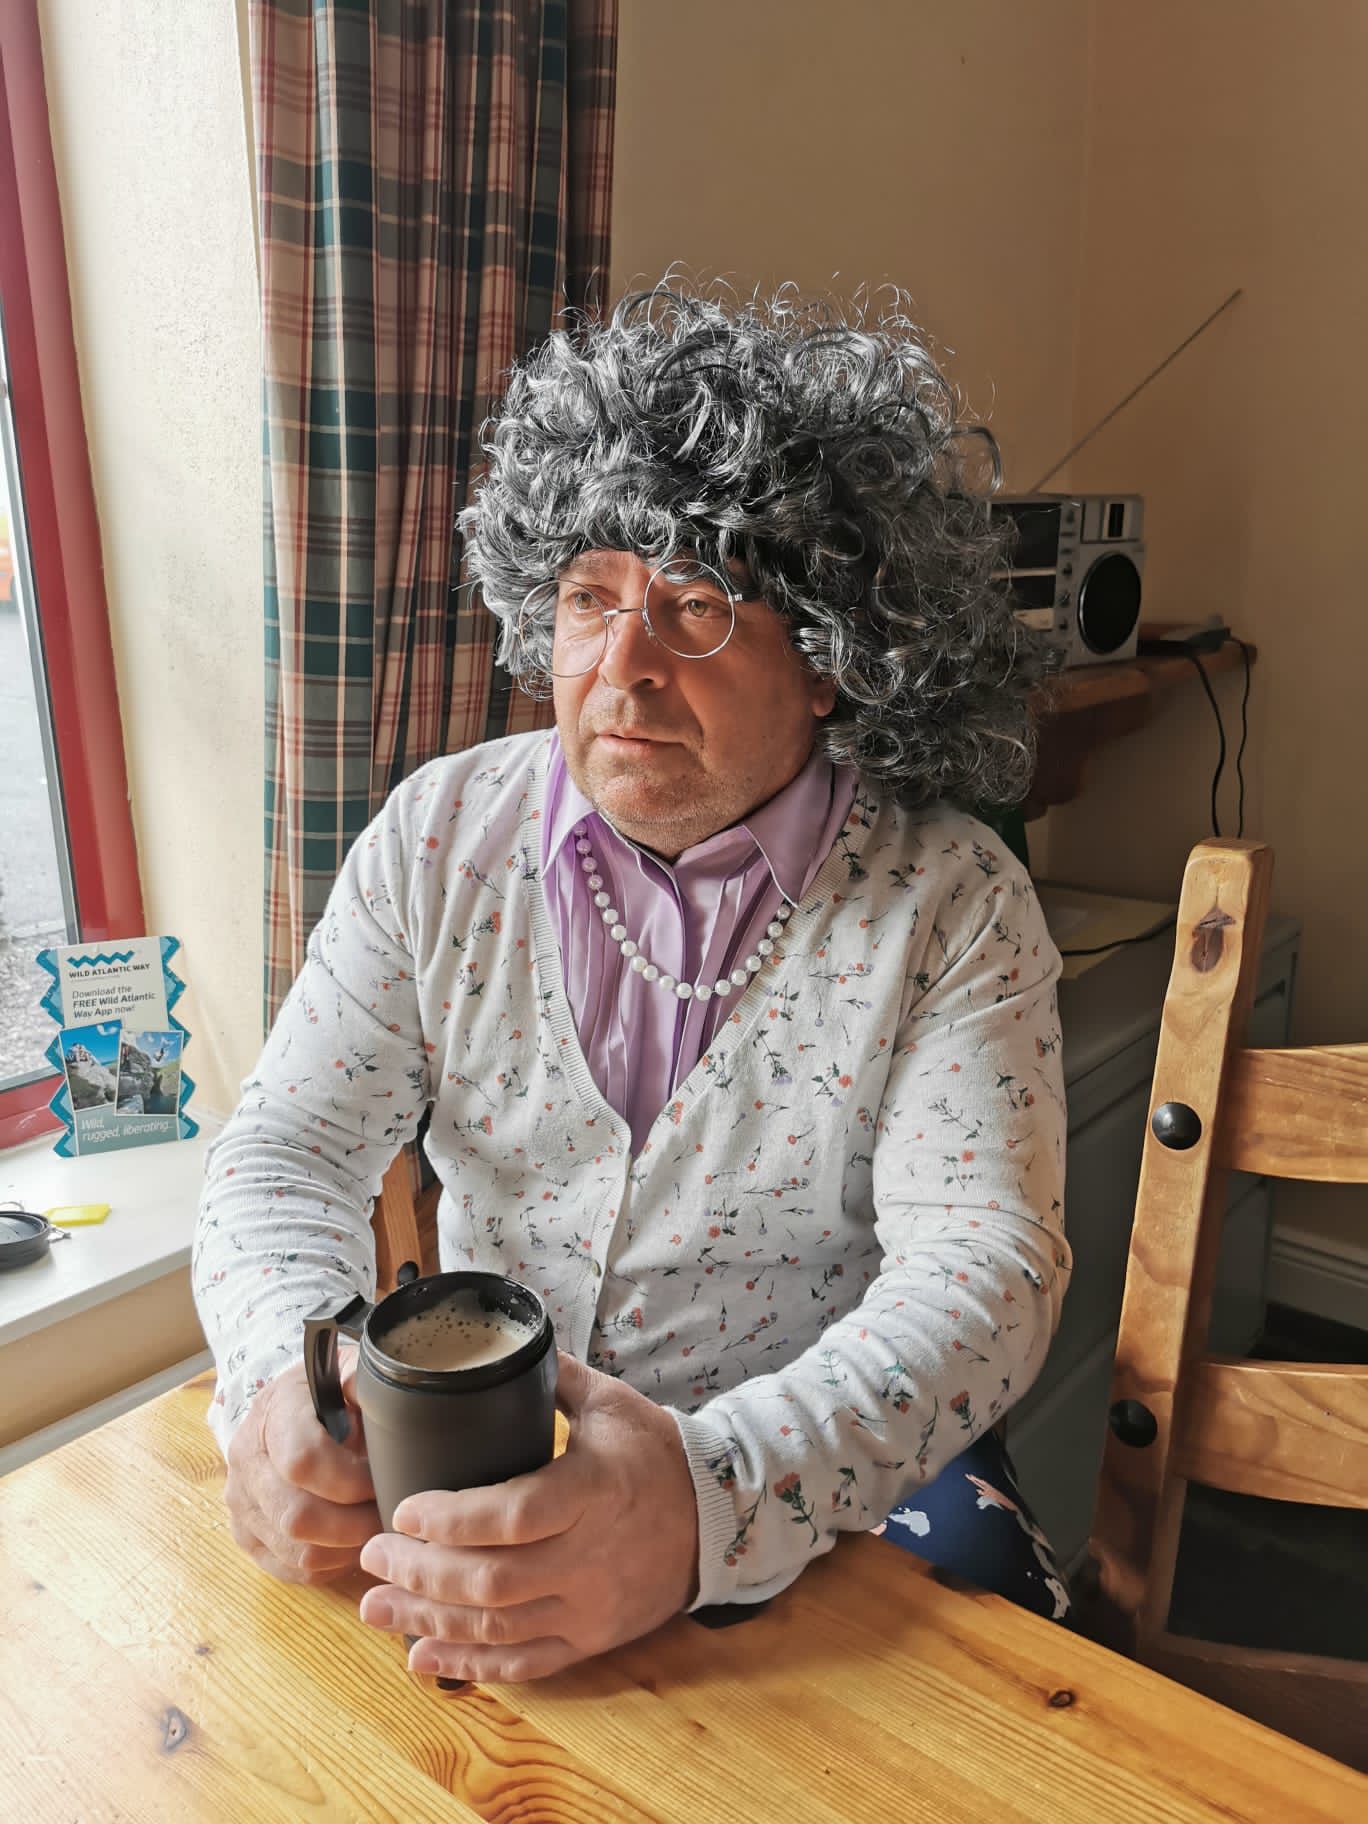 Scumrun Fundraiser has a well earned coffee while wearing a silly wig